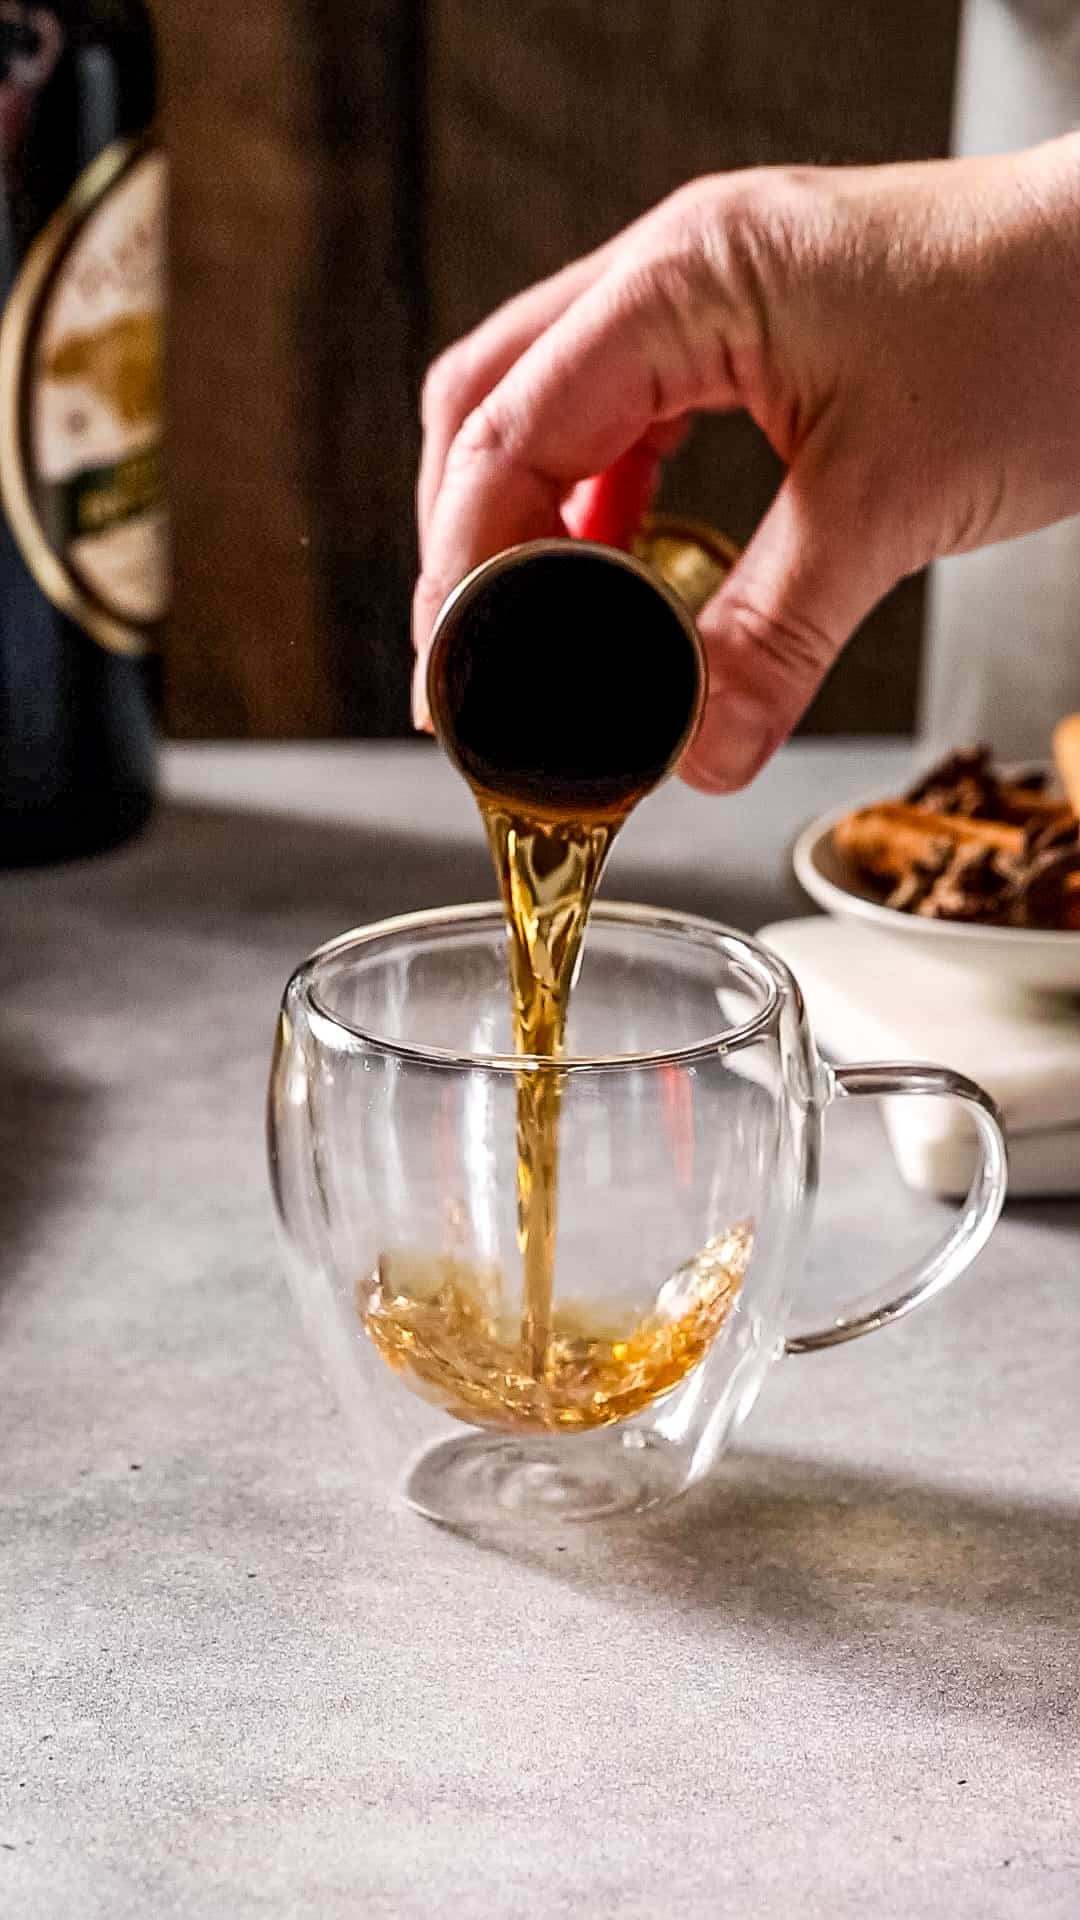 Hand pouring dark rum from a jigger into a glass mug.